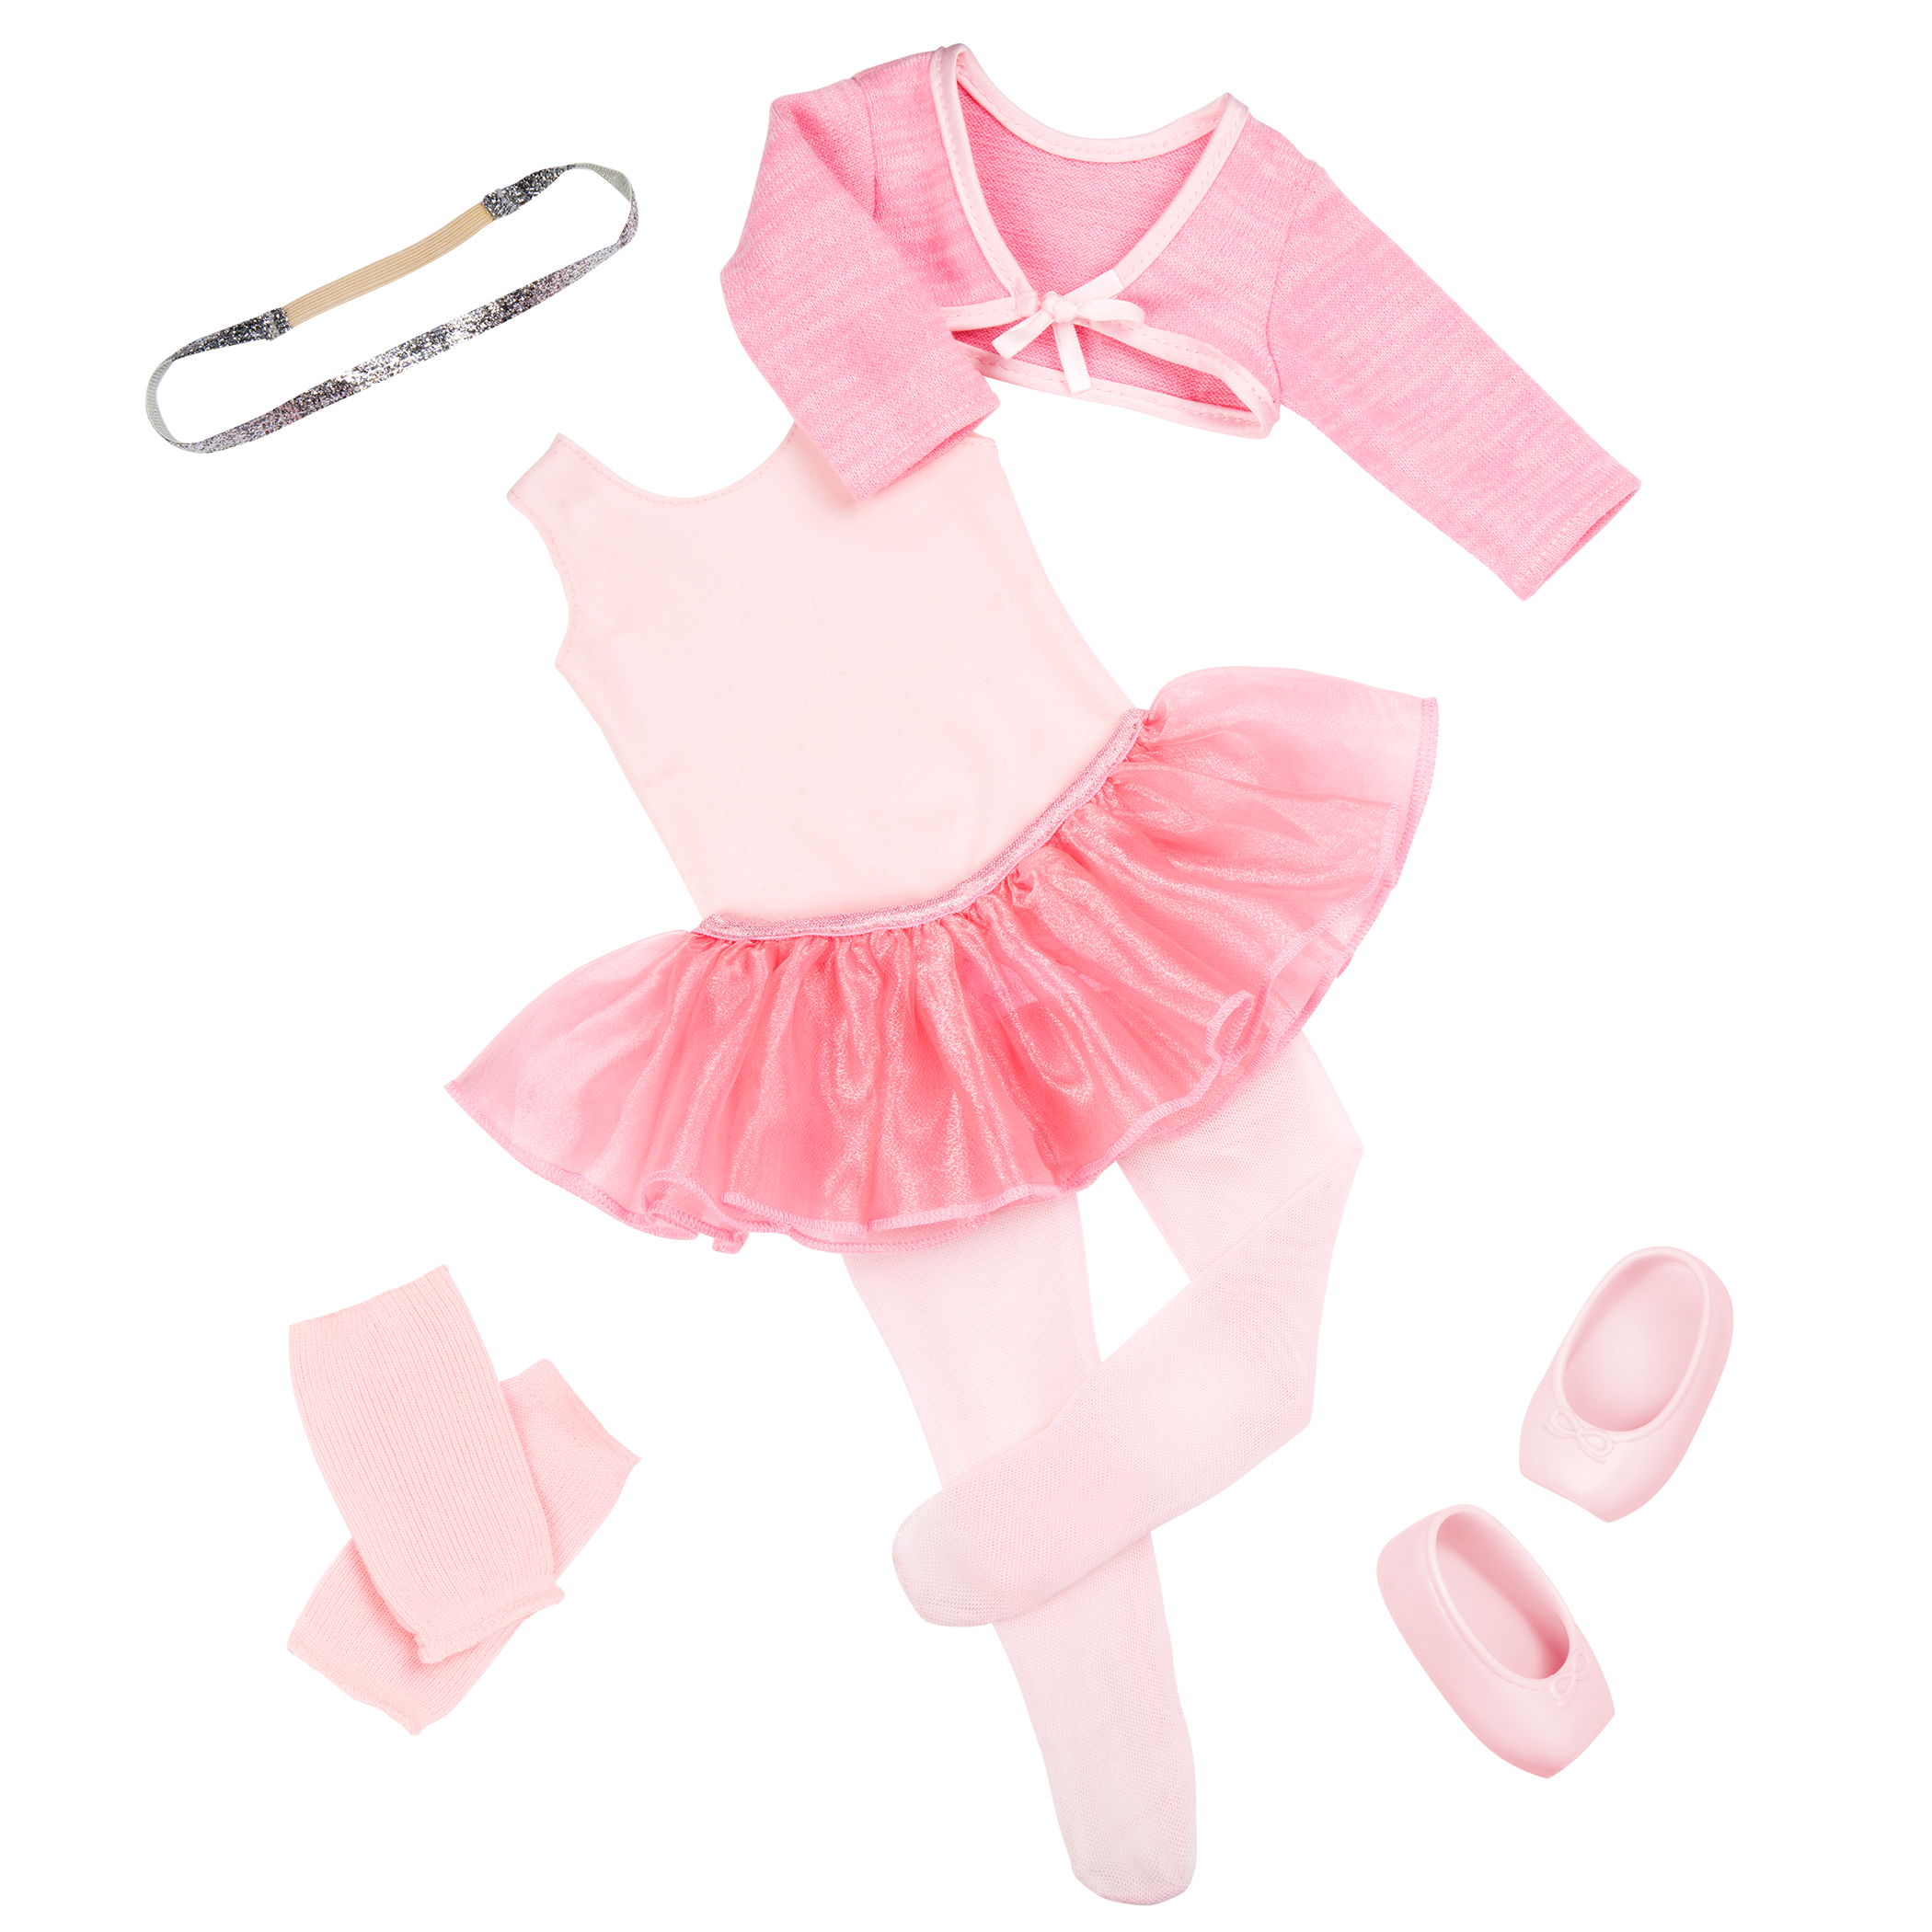 Our Generation 18-inch Ballerina Doll Sydney Lee Dance Outfit